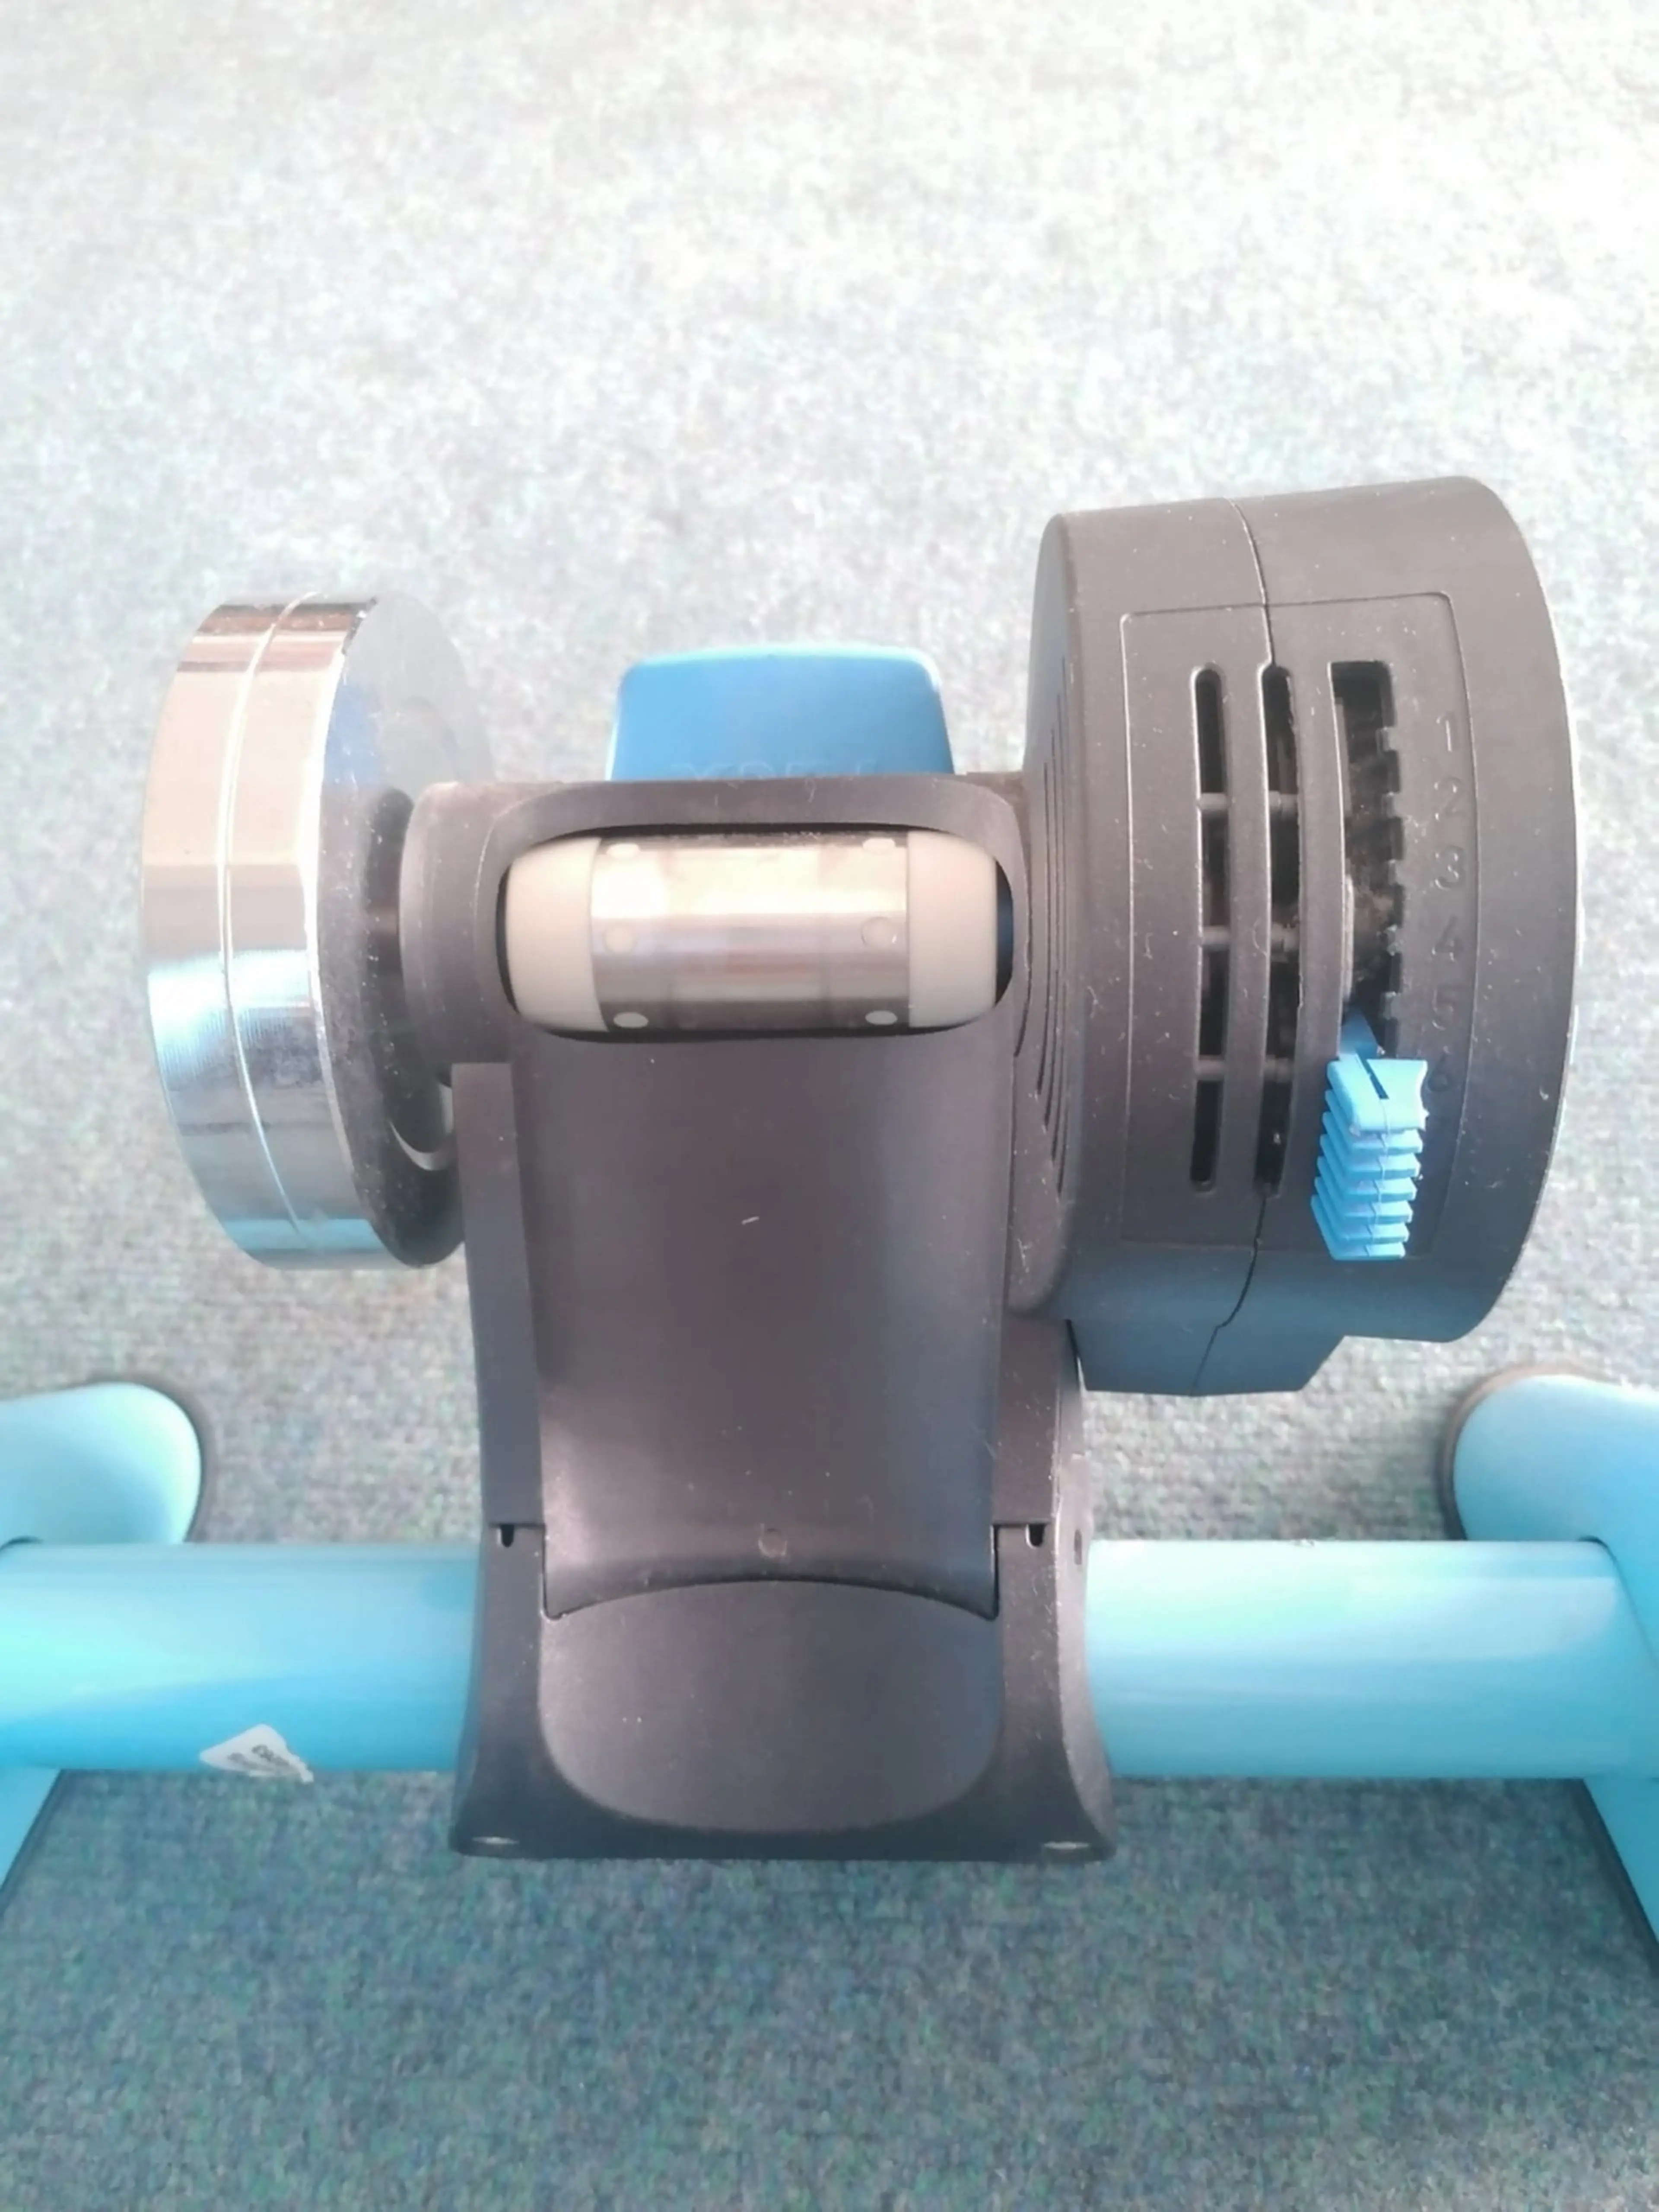 2. Home Trainer Tacx